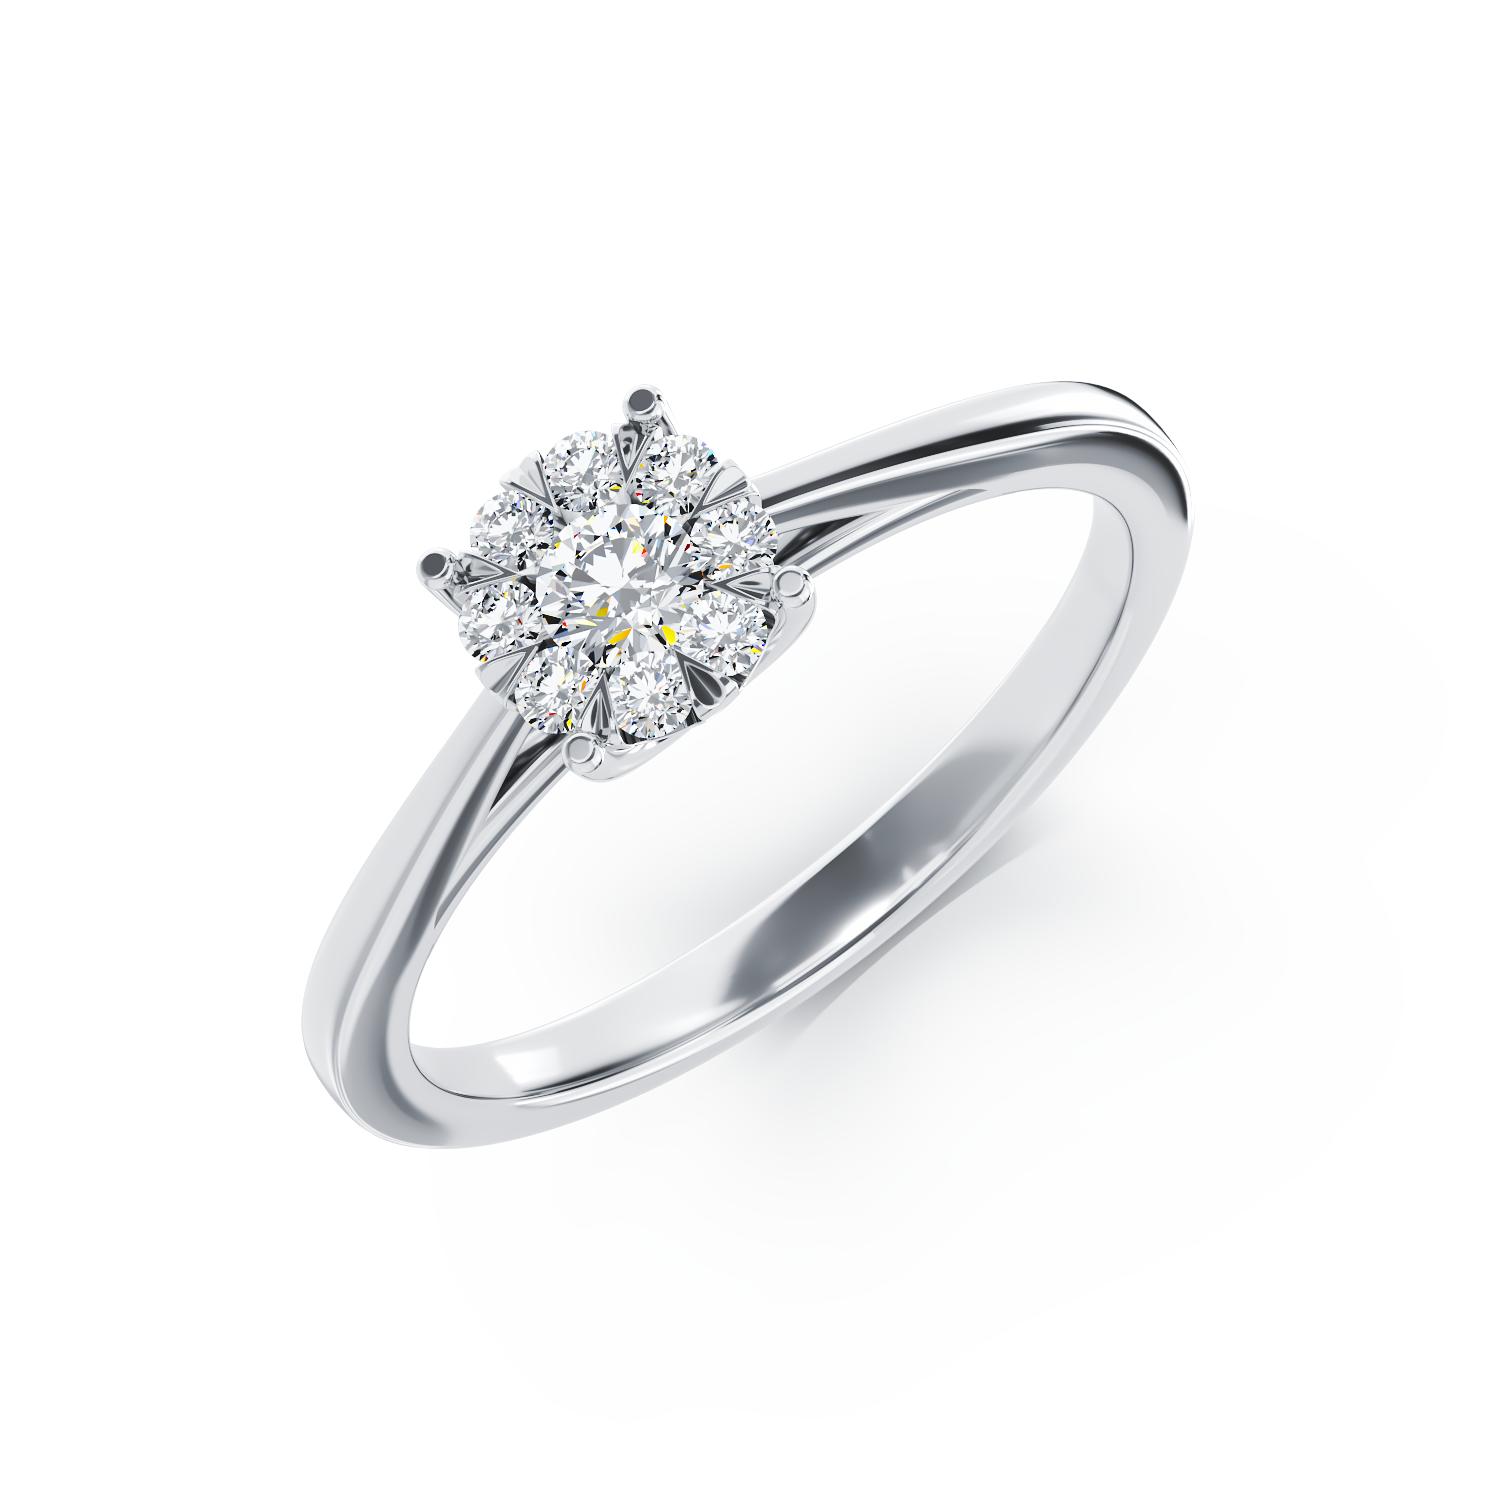 White gold engagement ring with 0.20ct diamonds